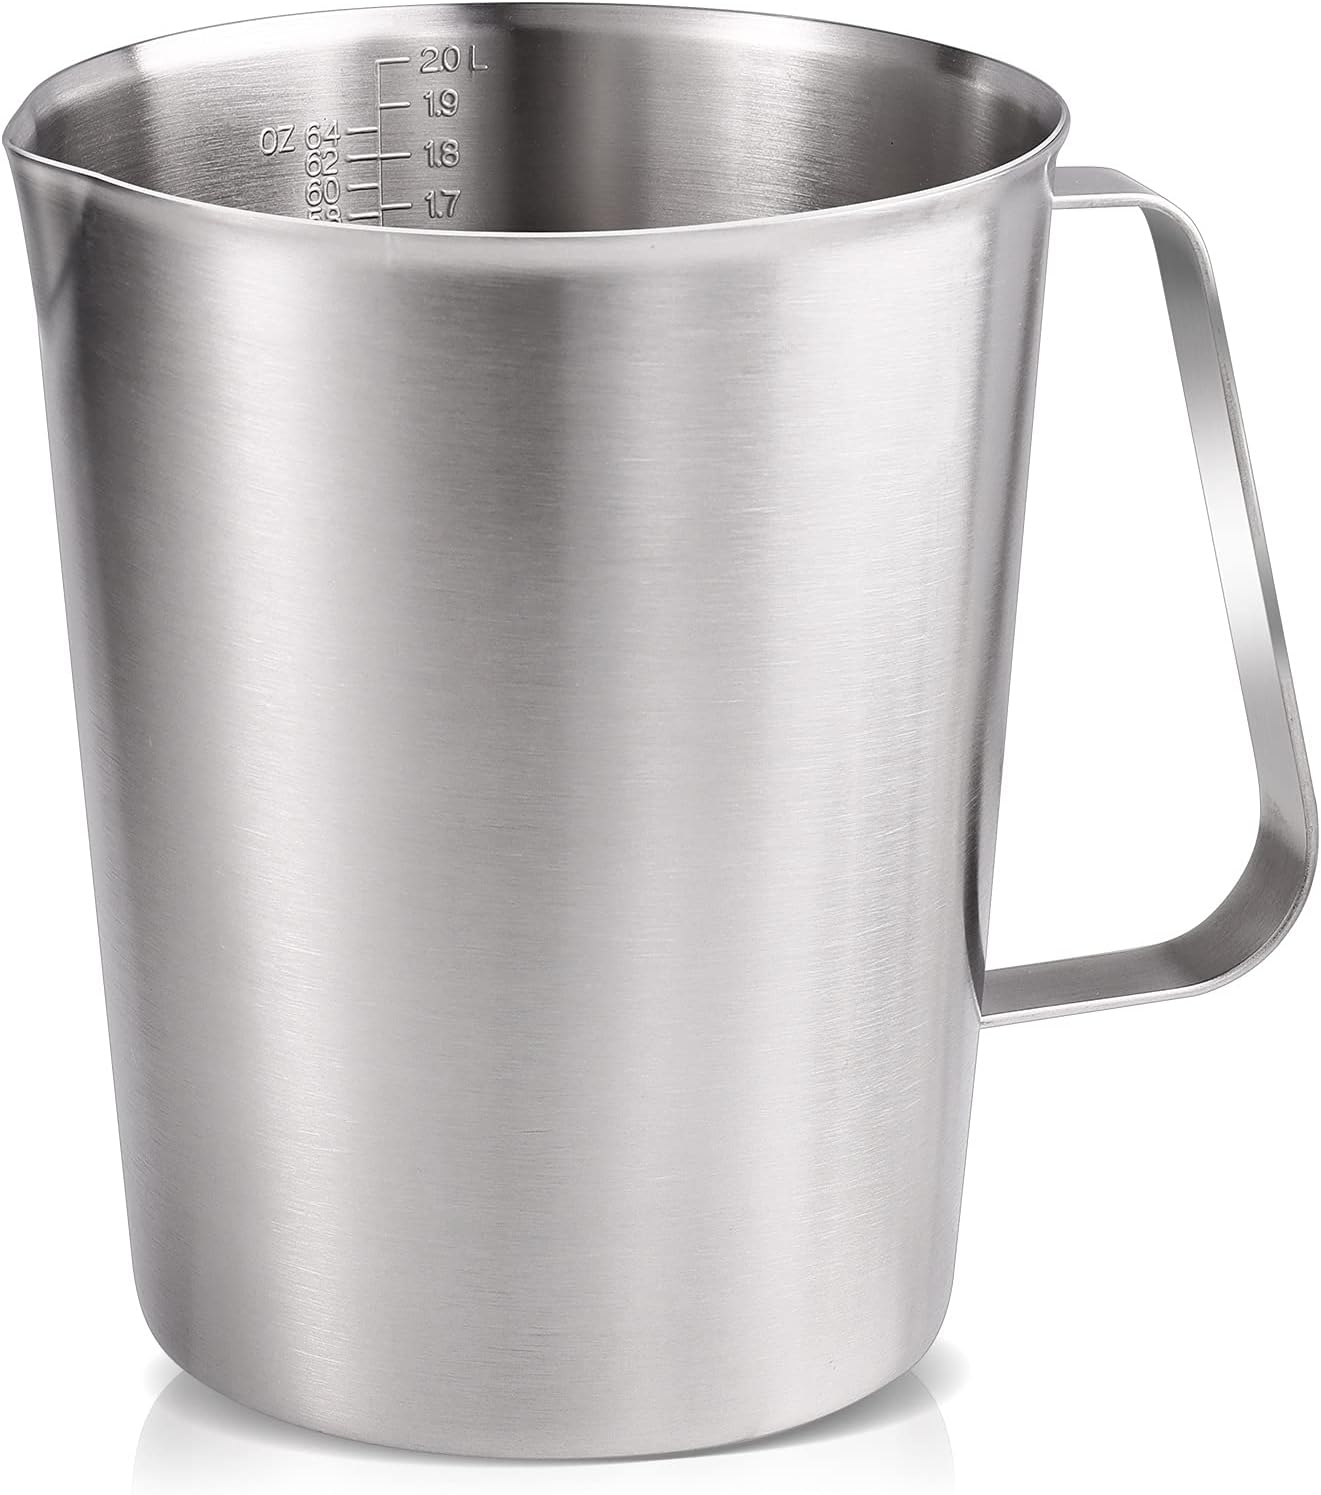 Stainless Measuring Cup (2000ML), KSENDALO 8 Cup Stainless Measuring Cup, Stainless Pitcher with Marking with Handle, 64 Ounces